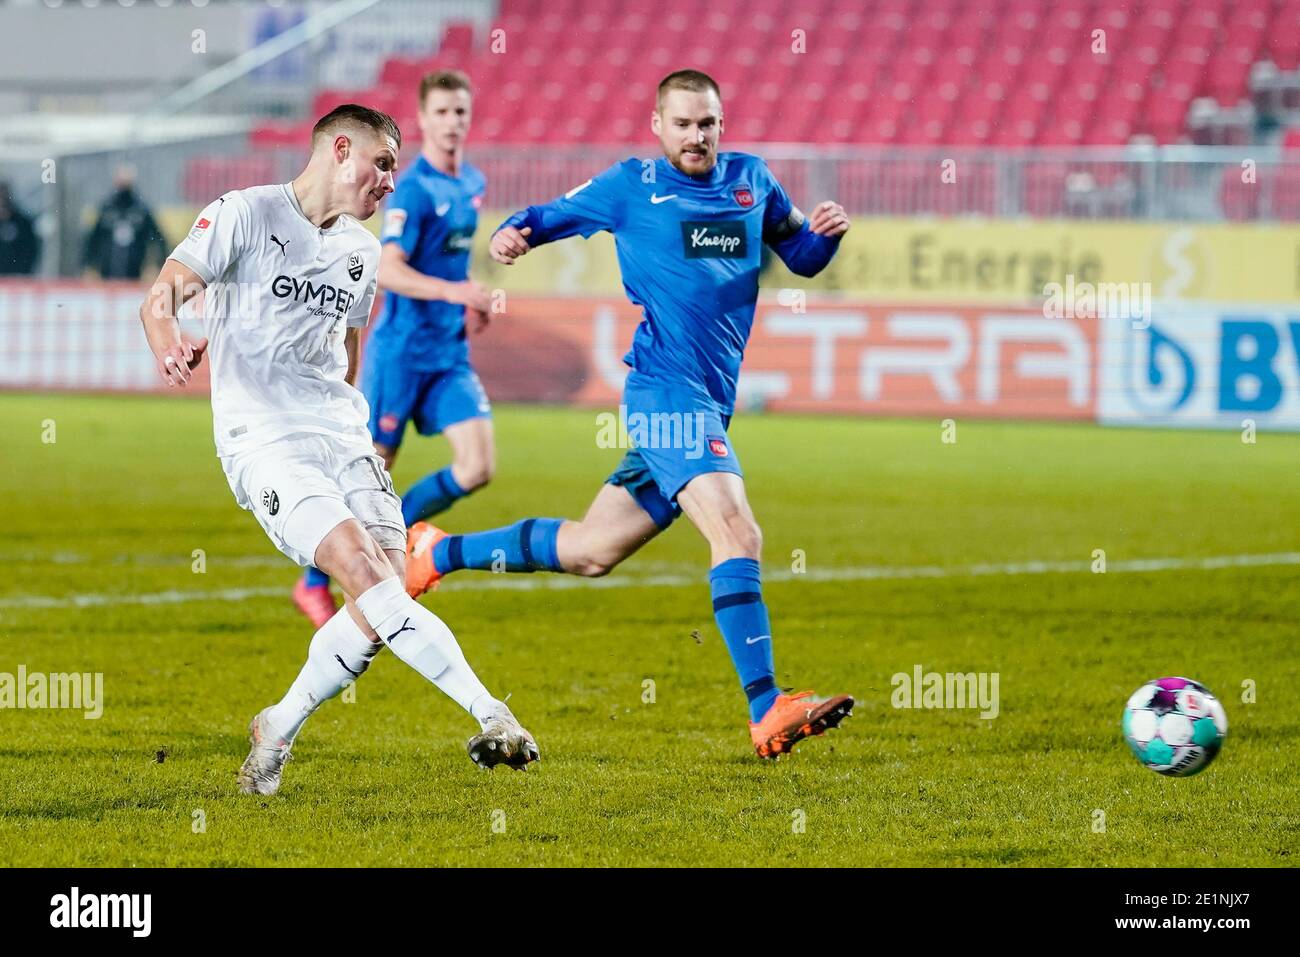 Sandhausen, Germany. 08th Jan, 2021. Football: 2nd Bundesliga, SV Sandhausen - 1. FC Heidenheim, Matchday 15, BWT-Stadion am Hardtwald. Sandhausen's goal scorer Kevin Behrens (l) scores the goal to make it 4:0. Credit: Uwe Anspach/dpa - IMPORTANT NOTE: In accordance with the regulations of the DFL Deutsche Fußball Liga and/or the DFB Deutscher Fußball-Bund, it is prohibited to use or have used photographs taken in the stadium and/or of the match in the form of sequence pictures and/or video-like photo series./dpa/Alamy Live News Stock Photo